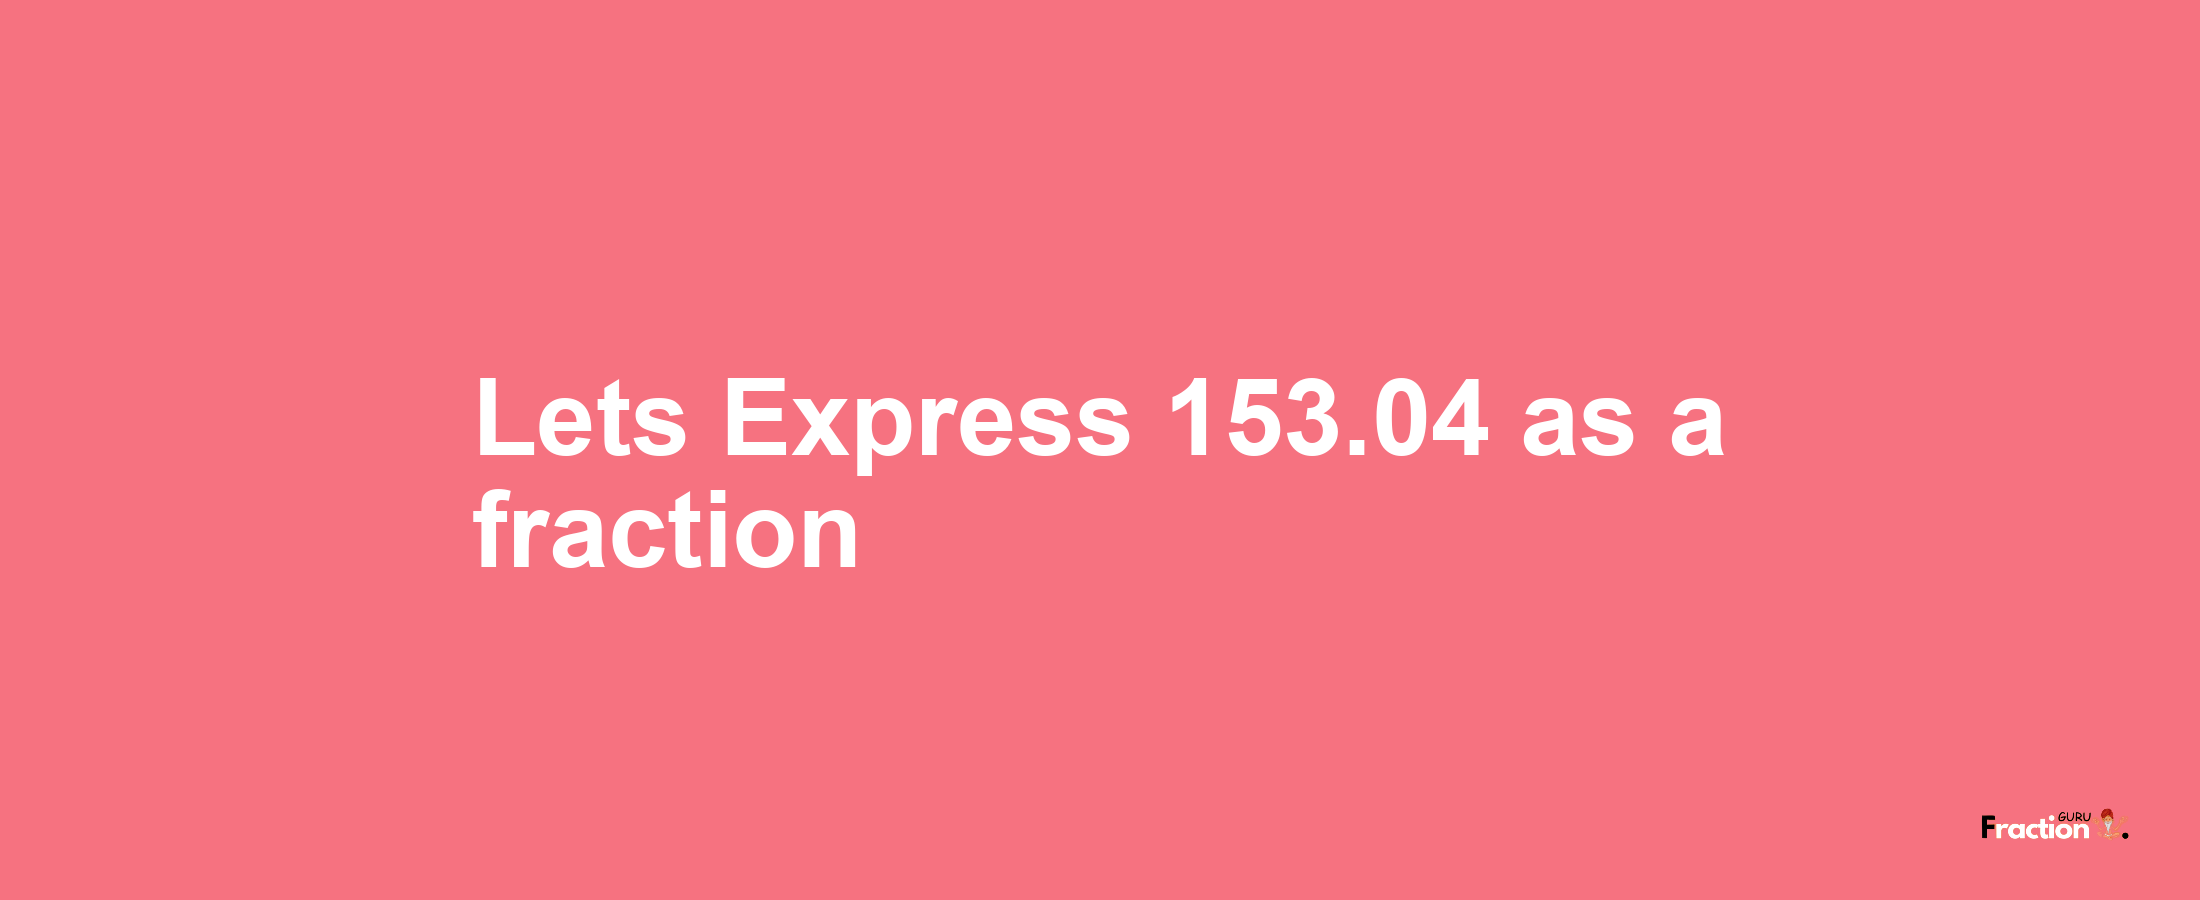 Lets Express 153.04 as afraction